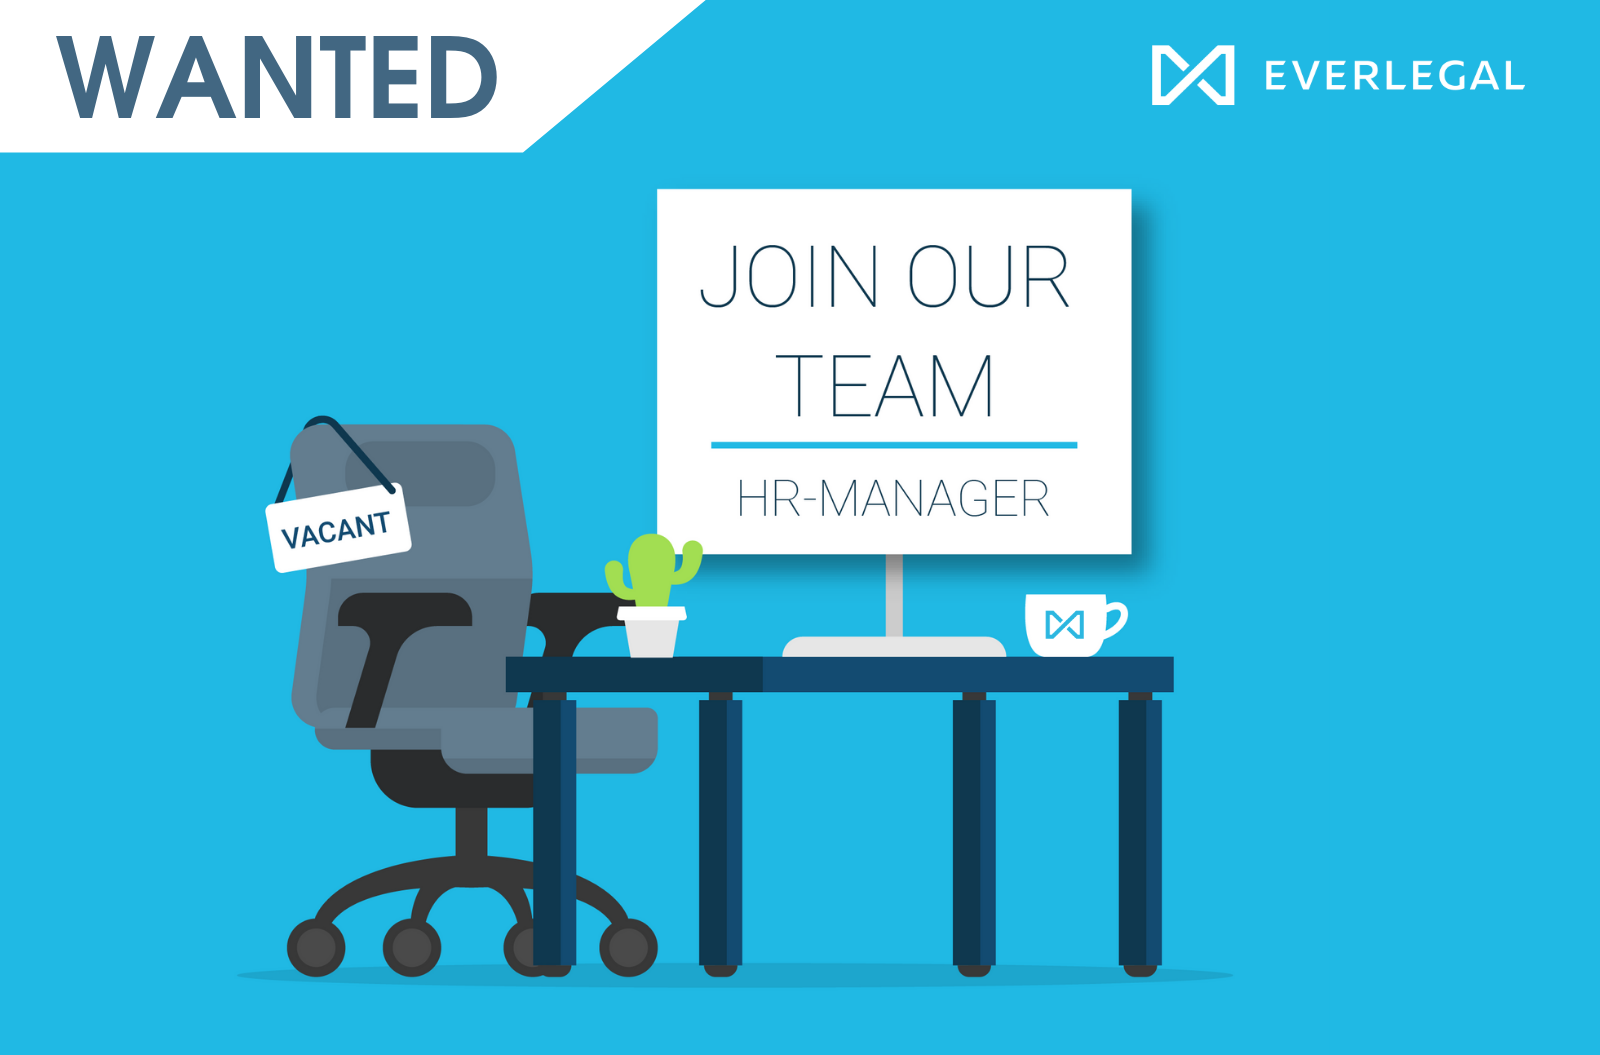 WANTED: HR-manager